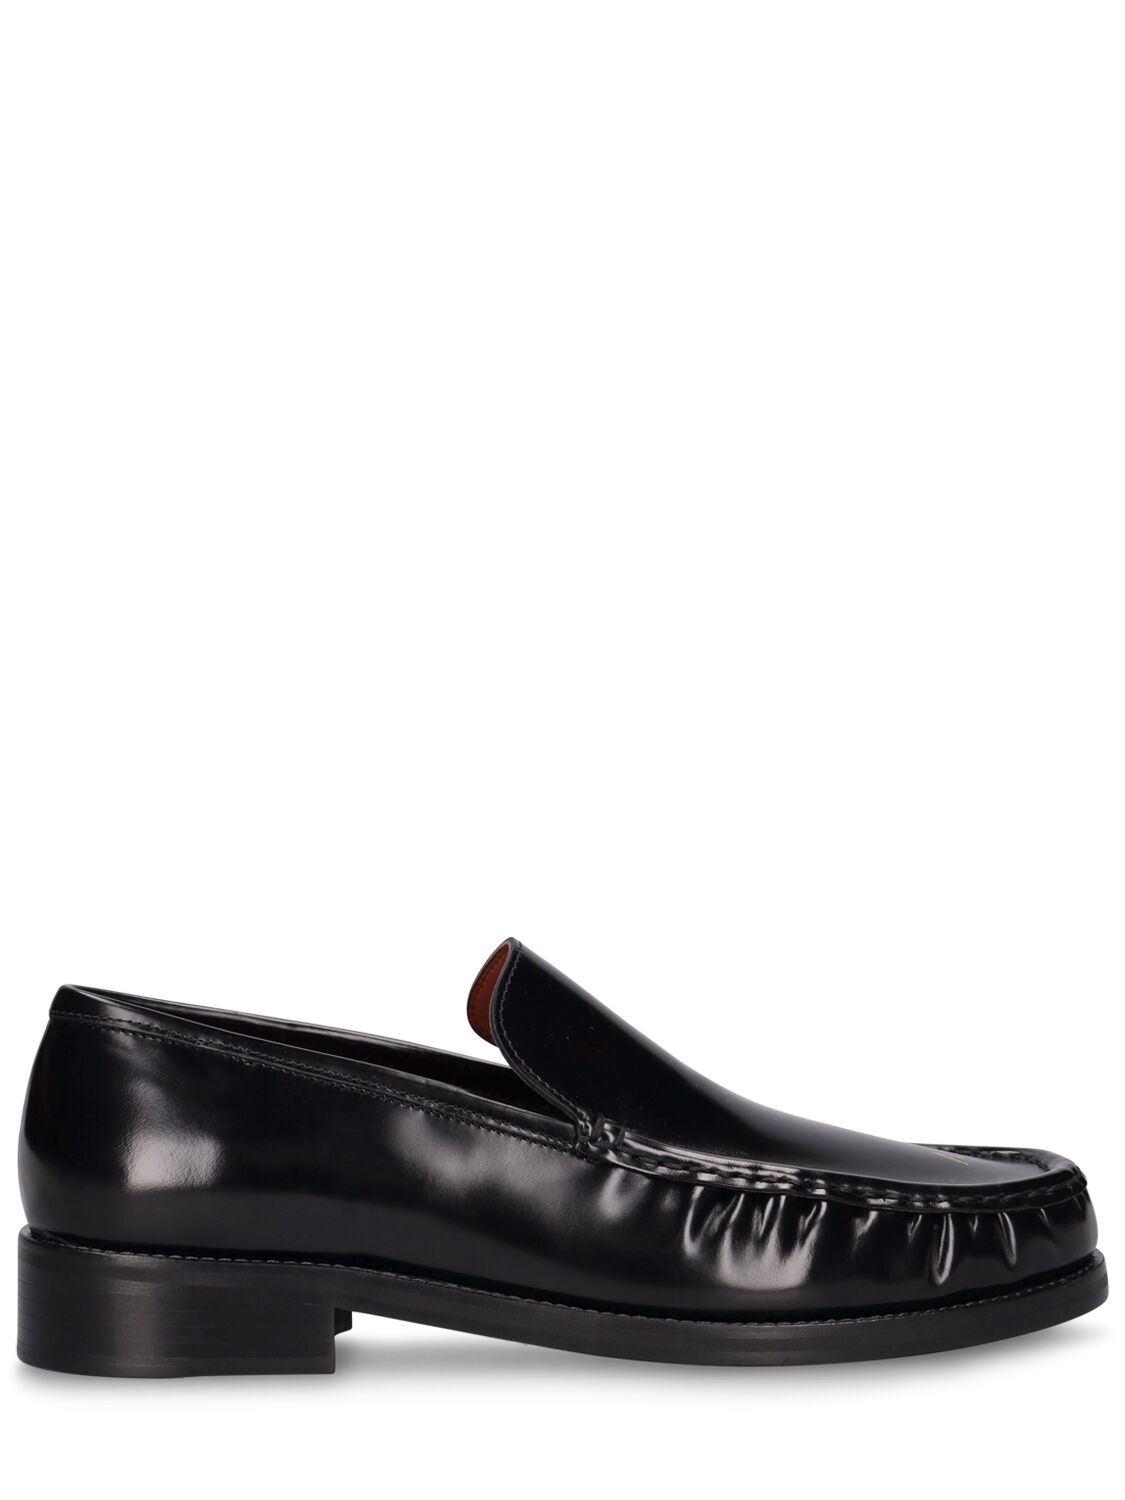 ACNE STUDIOS BOAFER SPORT LEATHER LOAFERS